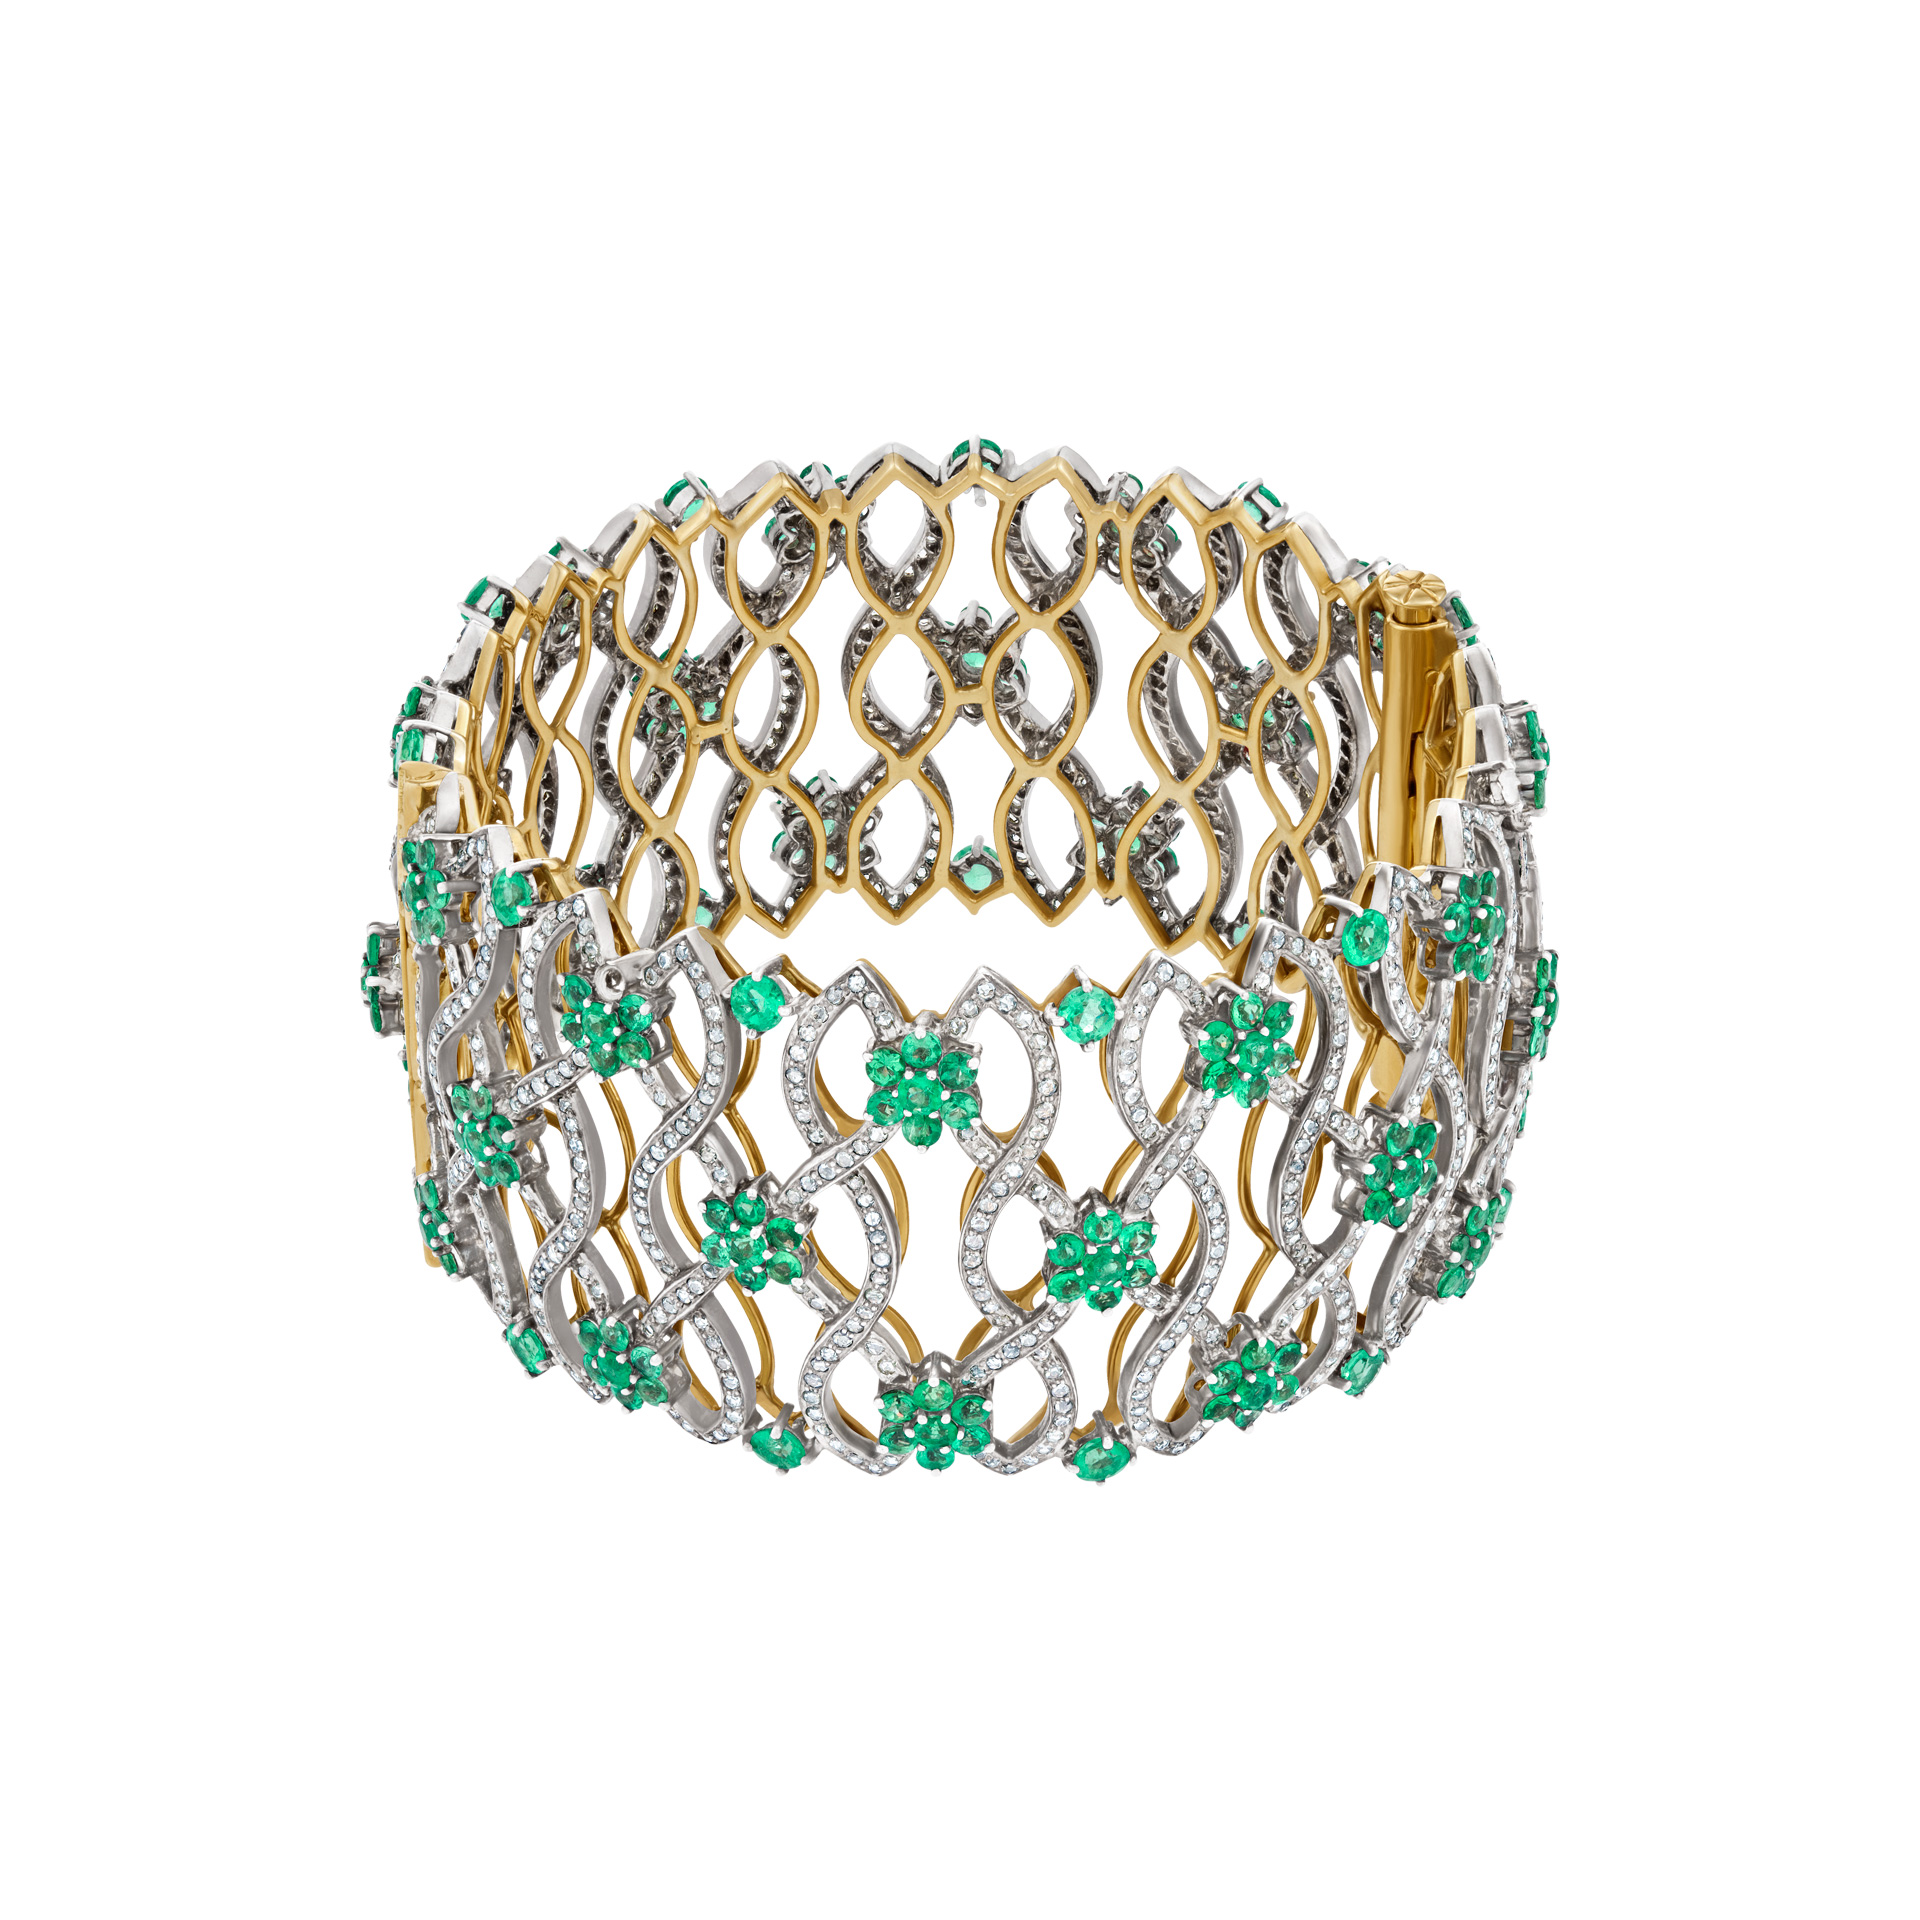 Emerald and diamond bangle in 14k & sterling silver